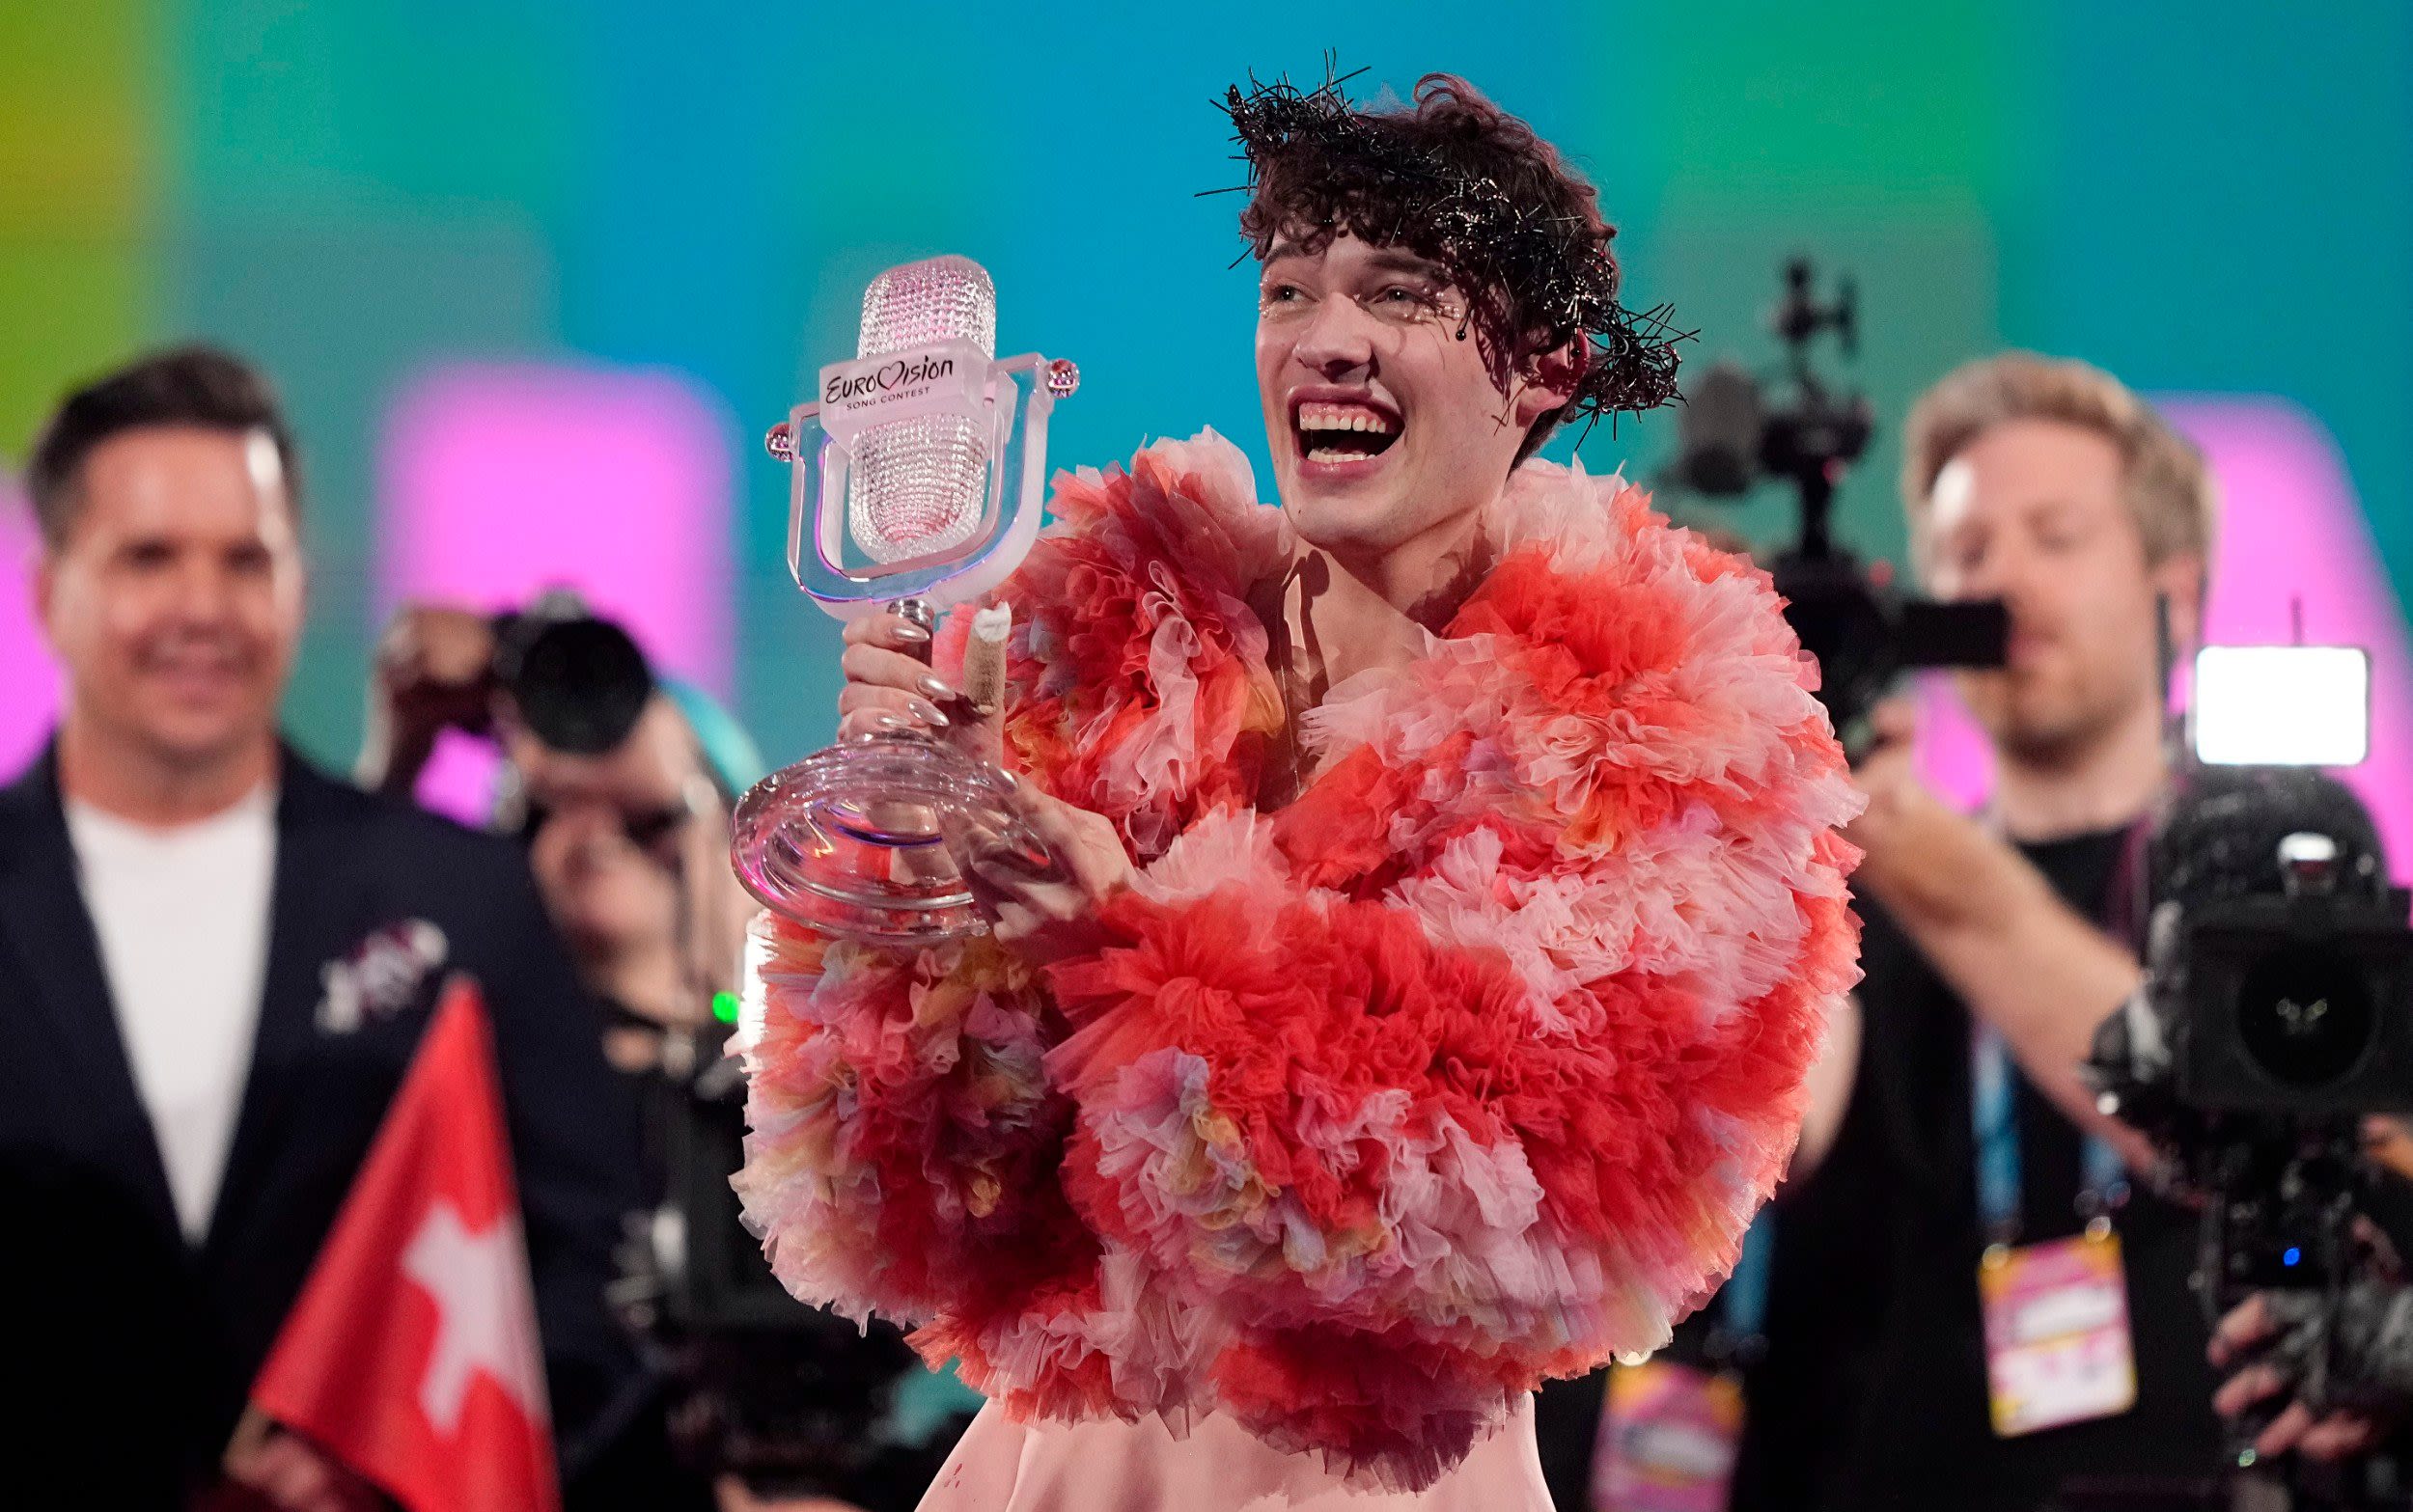 Nemo wins Eurovision for Switzerland after controversial grand final